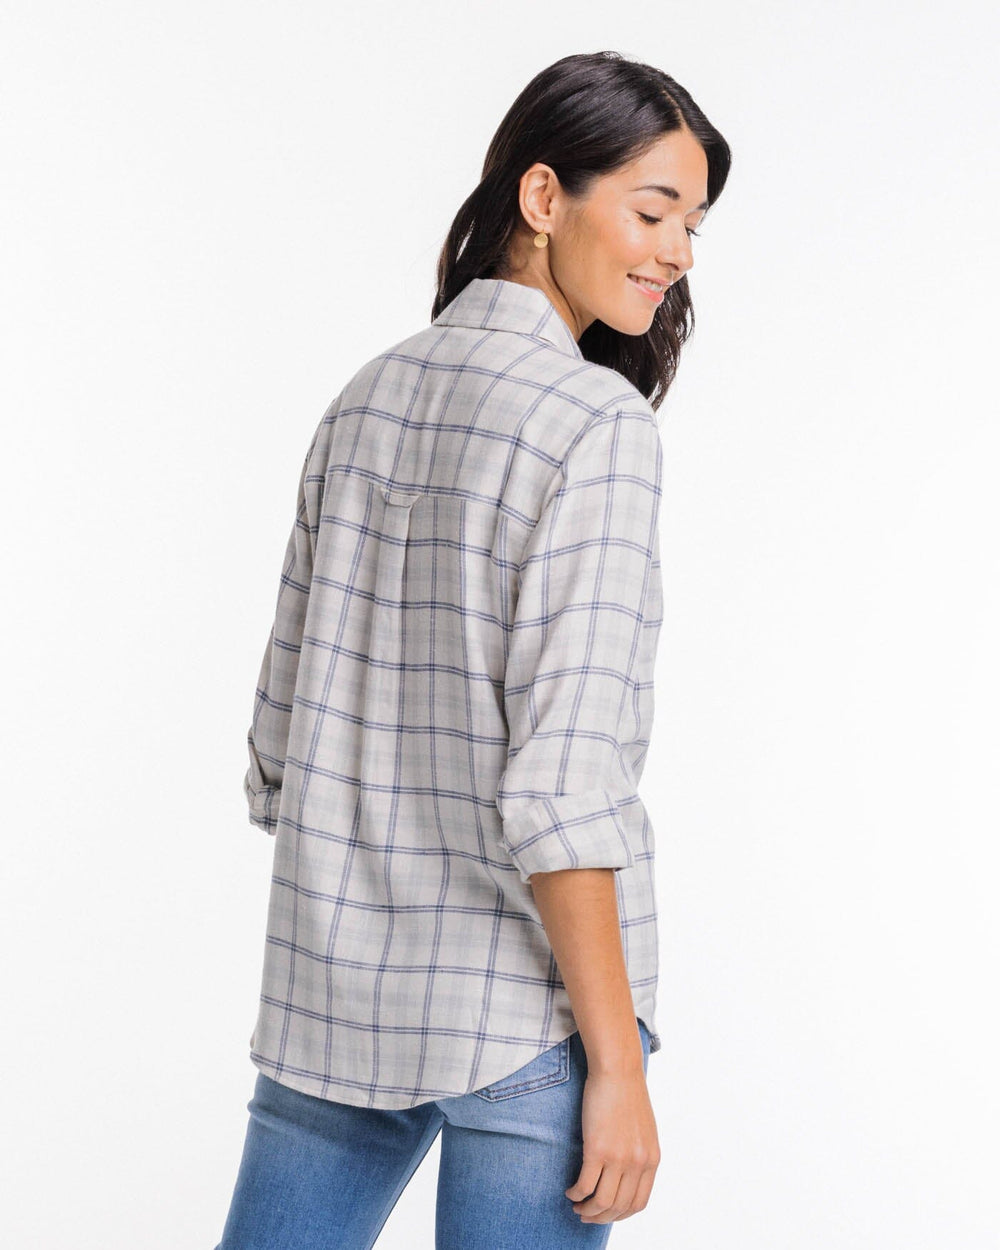 The back view of the Southern Tide Niki Chilly Morning Plaid Shirt by Southern Tide - Marshmallow